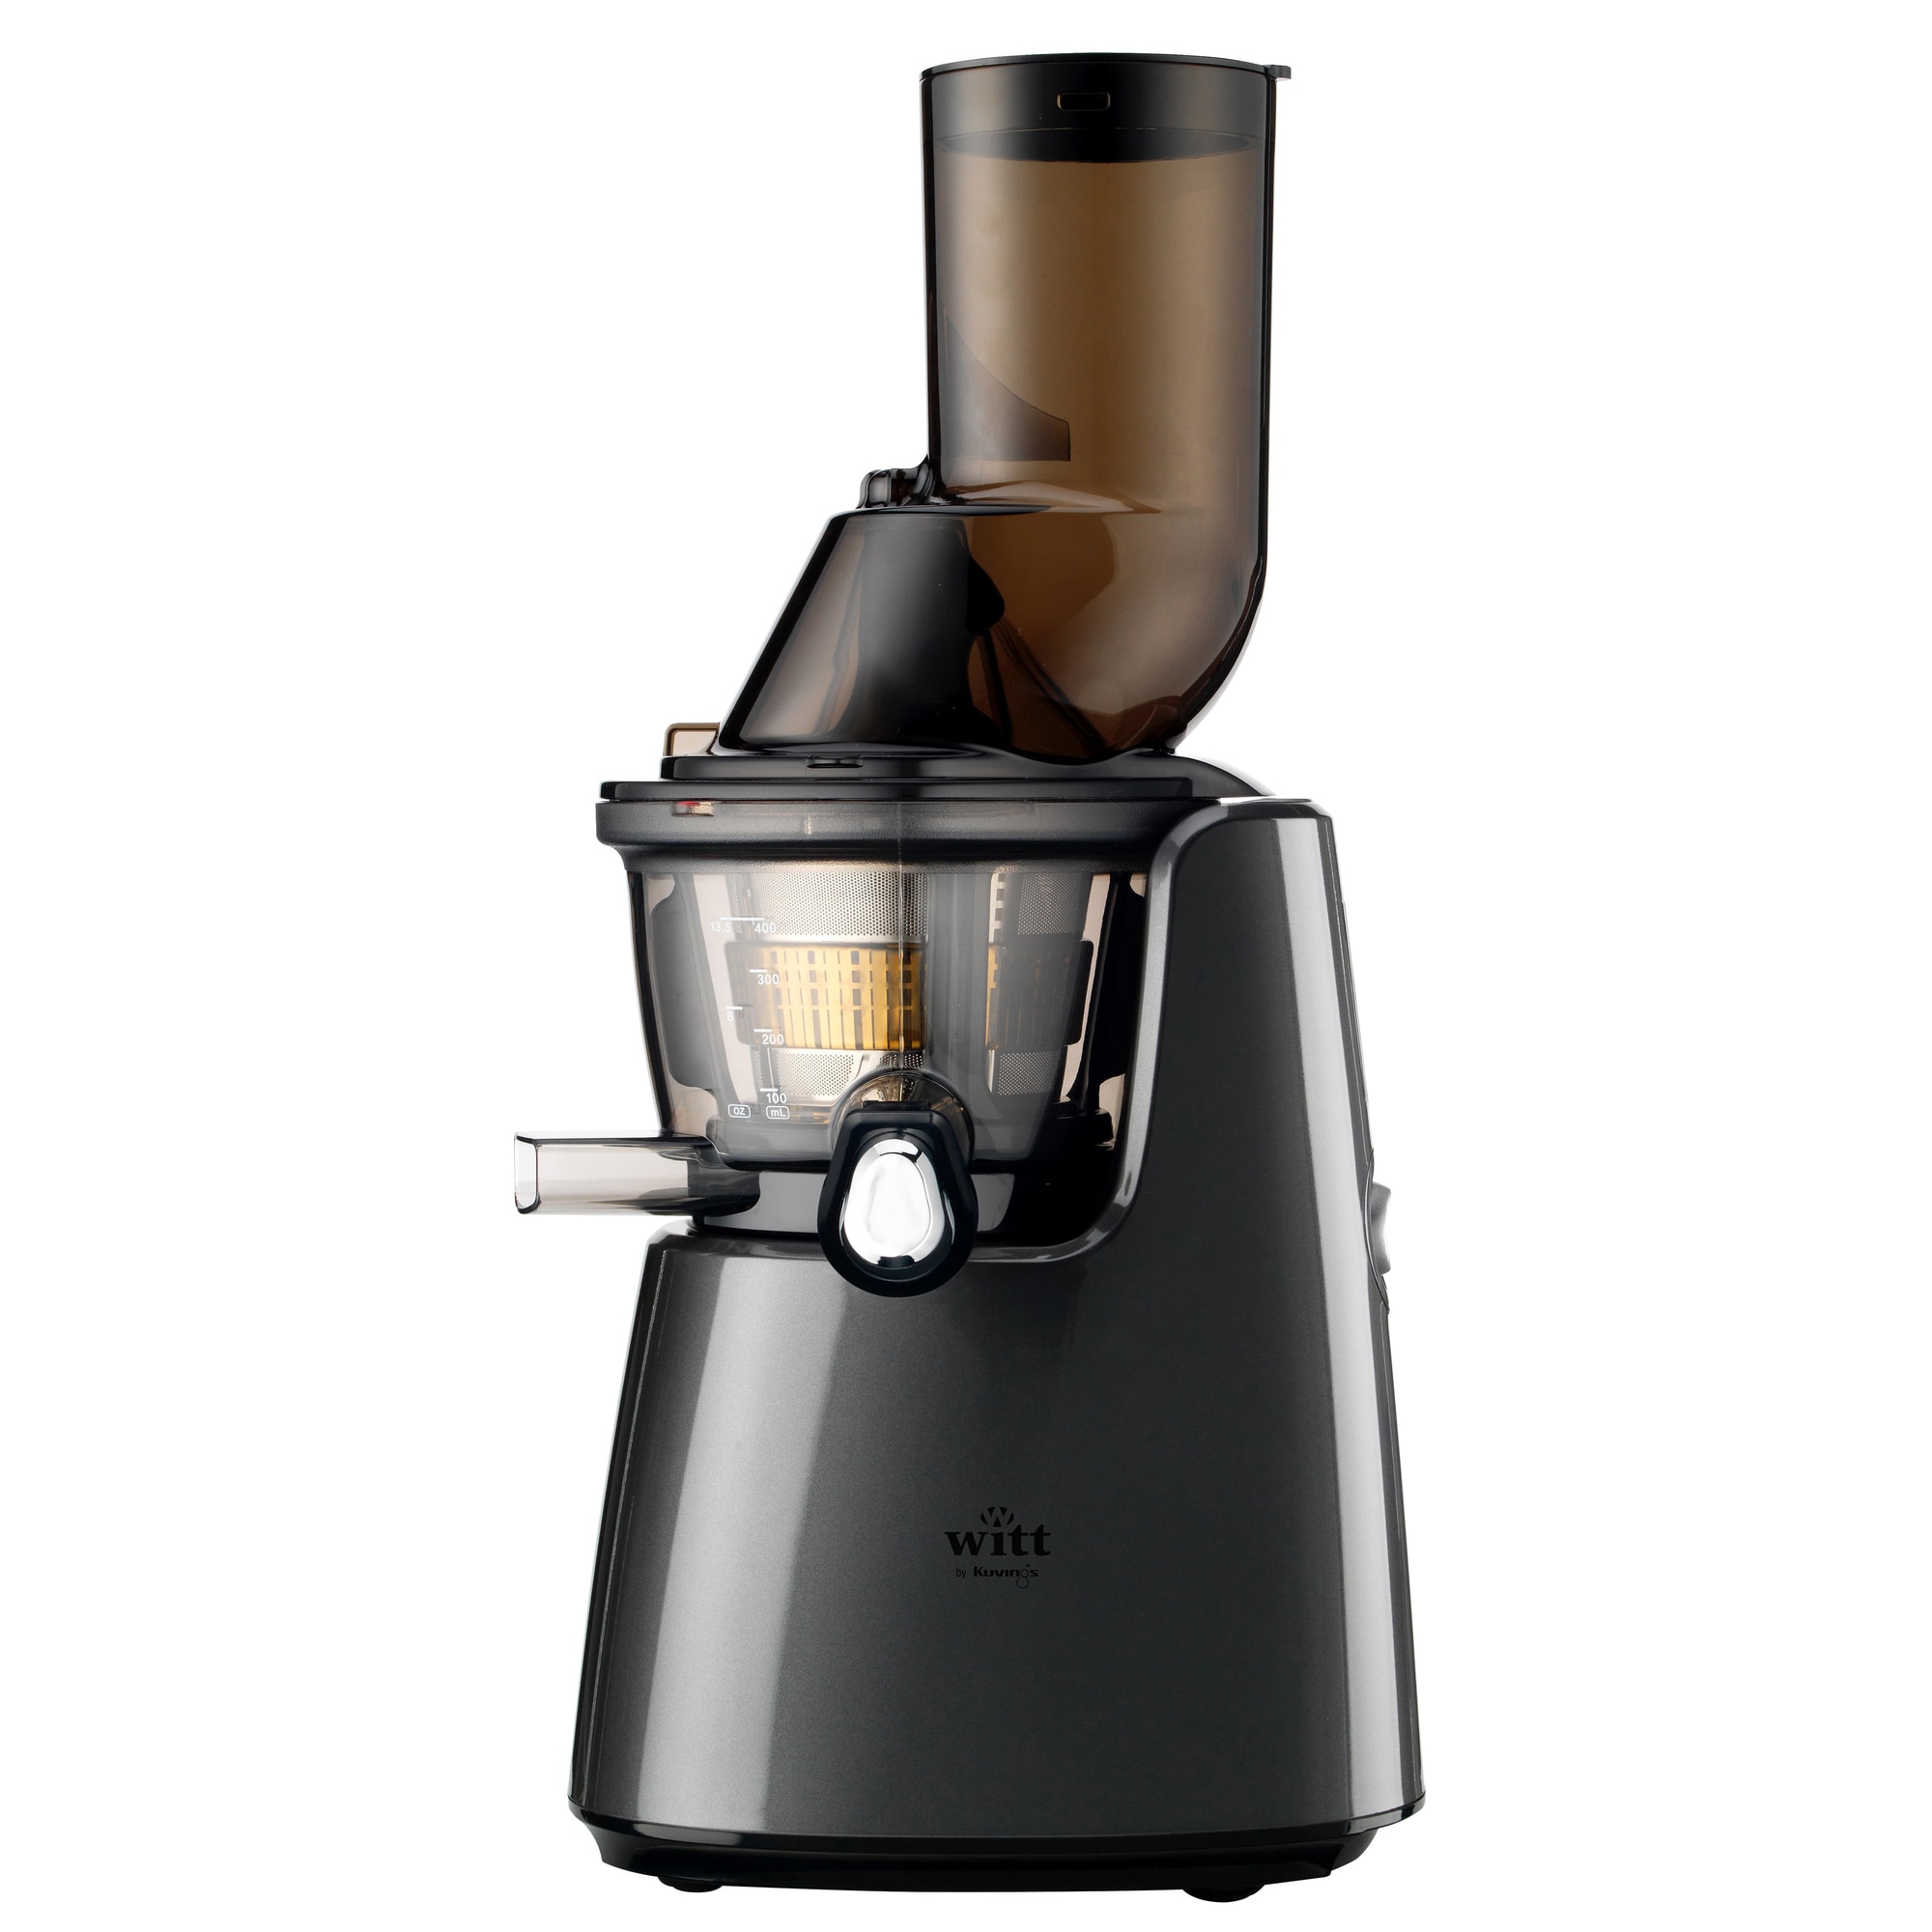 Witt by Kuvings slow juicer